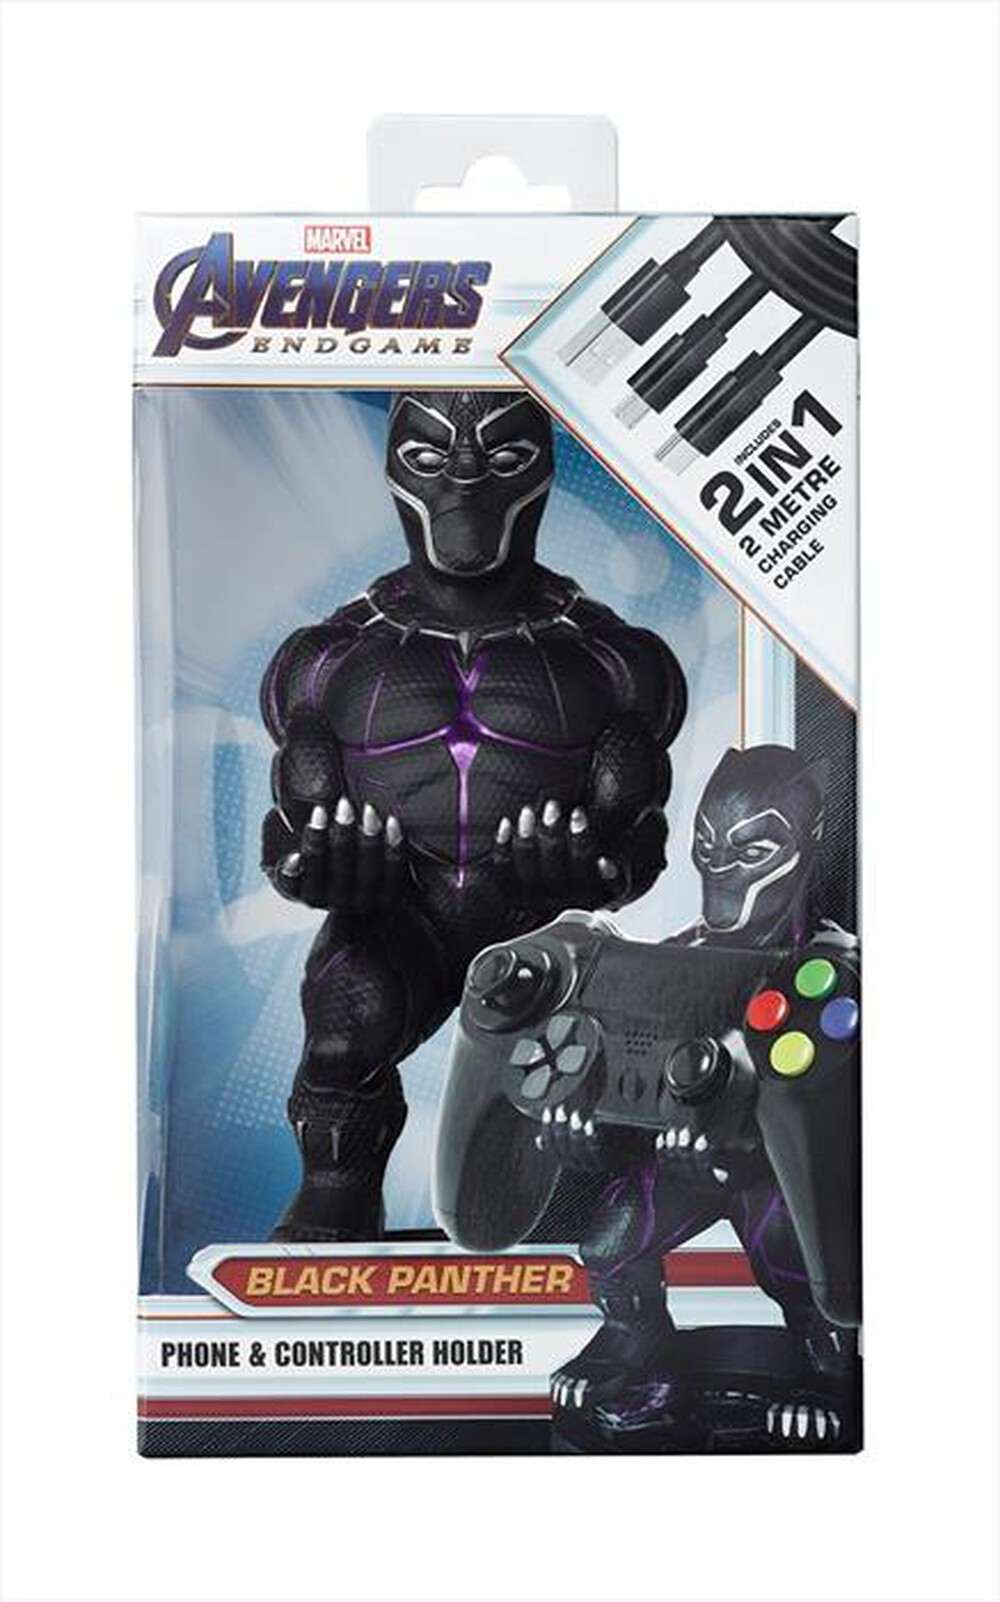 "EXQUISITE GAMING - BLACK PANTHER CABLE GUY"